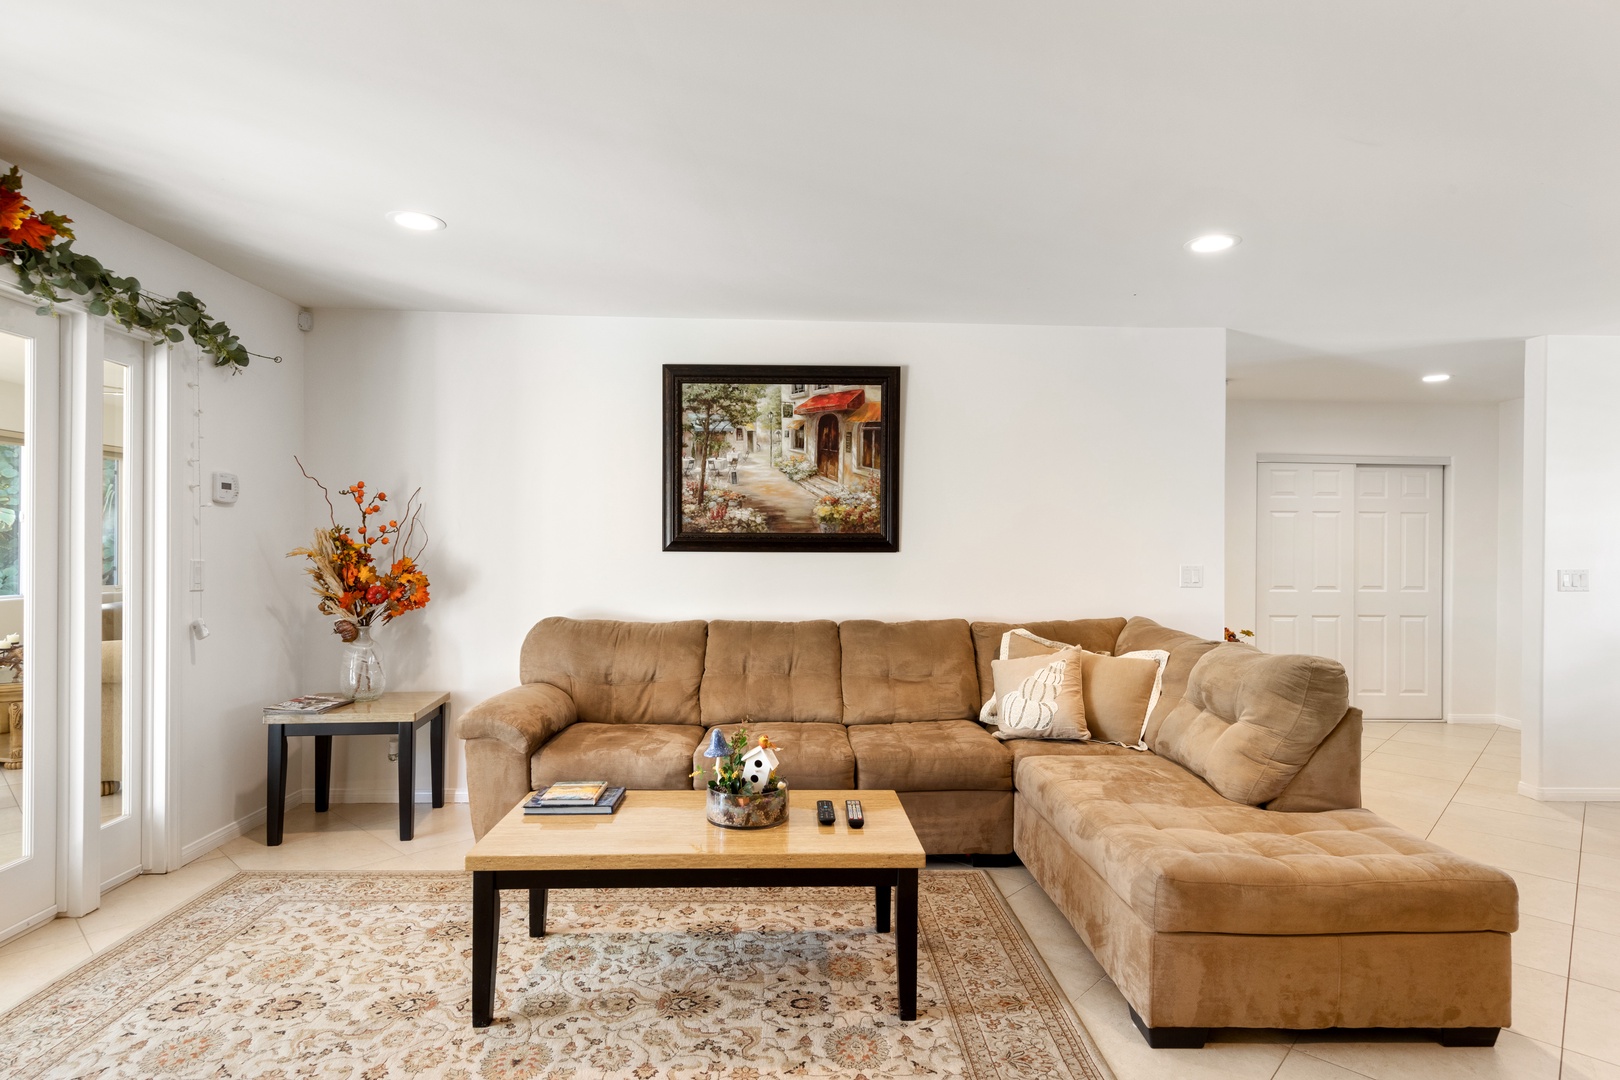 Living area with ample seating for family and friends